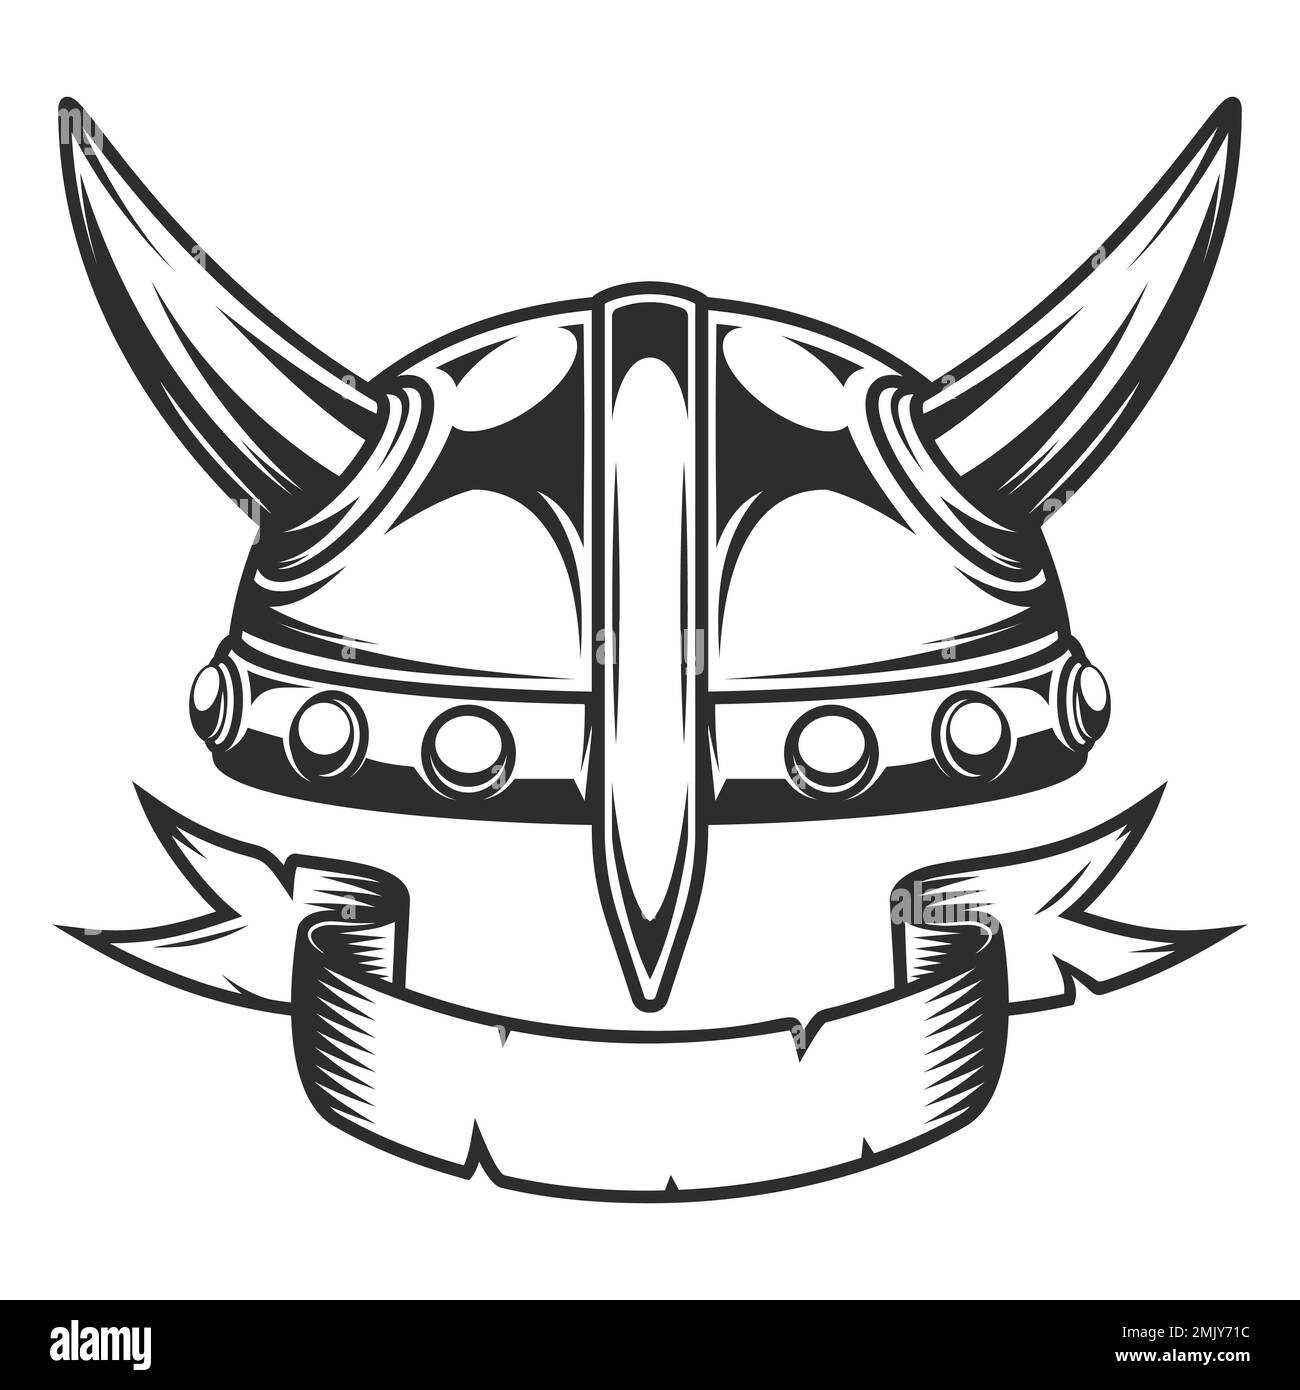 Viking vintage emblem with serious medieval nordic warrior horned helmet and ribbon isolated vector illustration Stock Vector